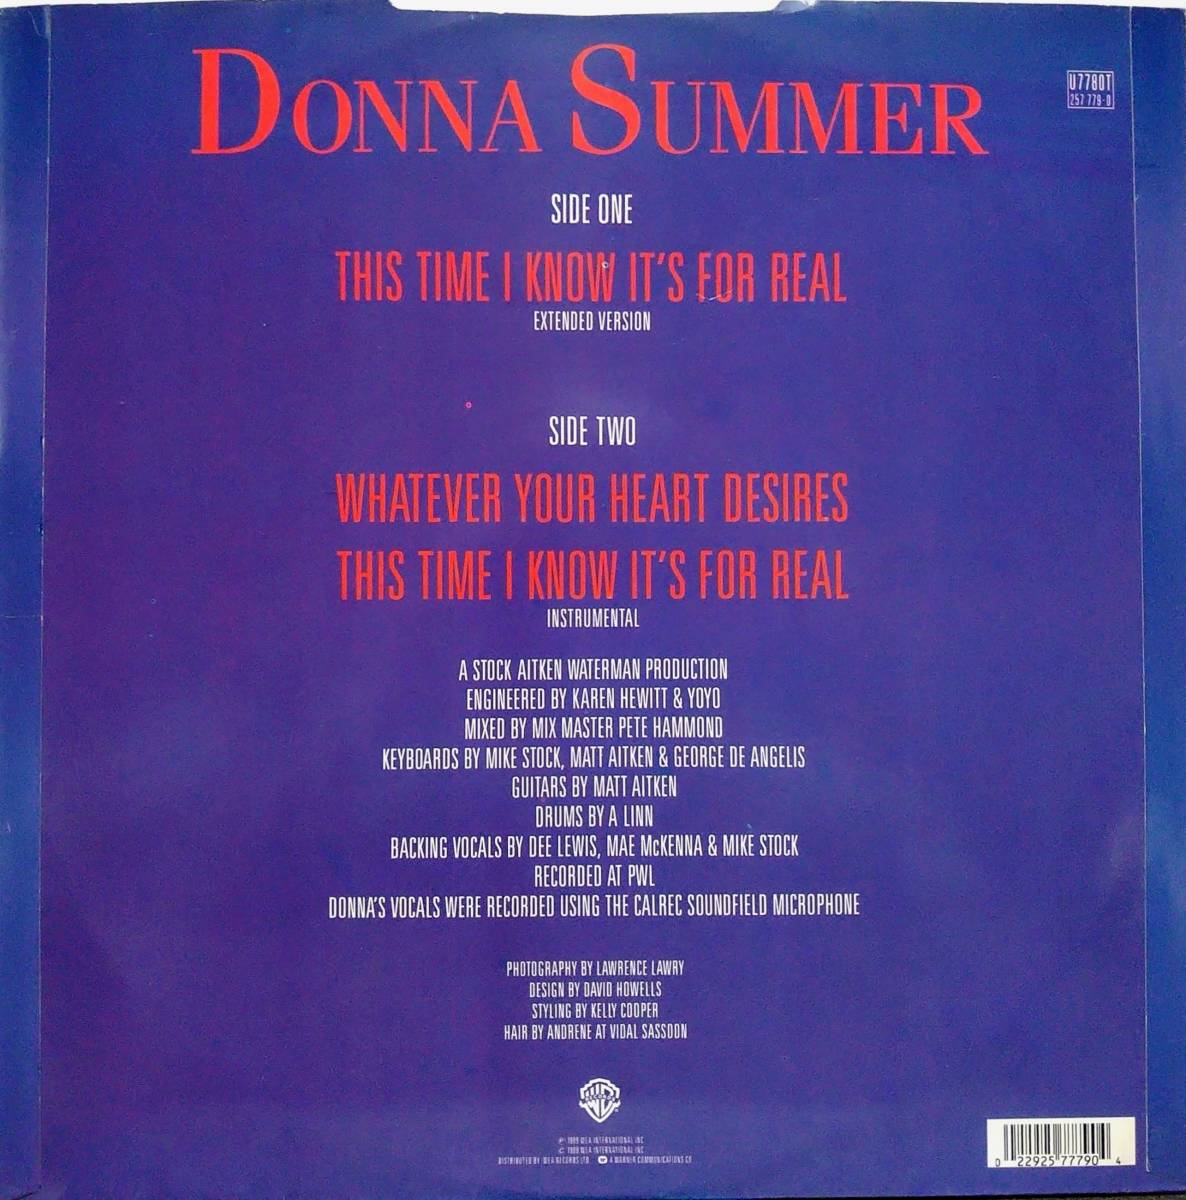 【12's Euro Beat Soul】Donna Summer「This Time I Know It's For Real」UK盤_裏ジャケット